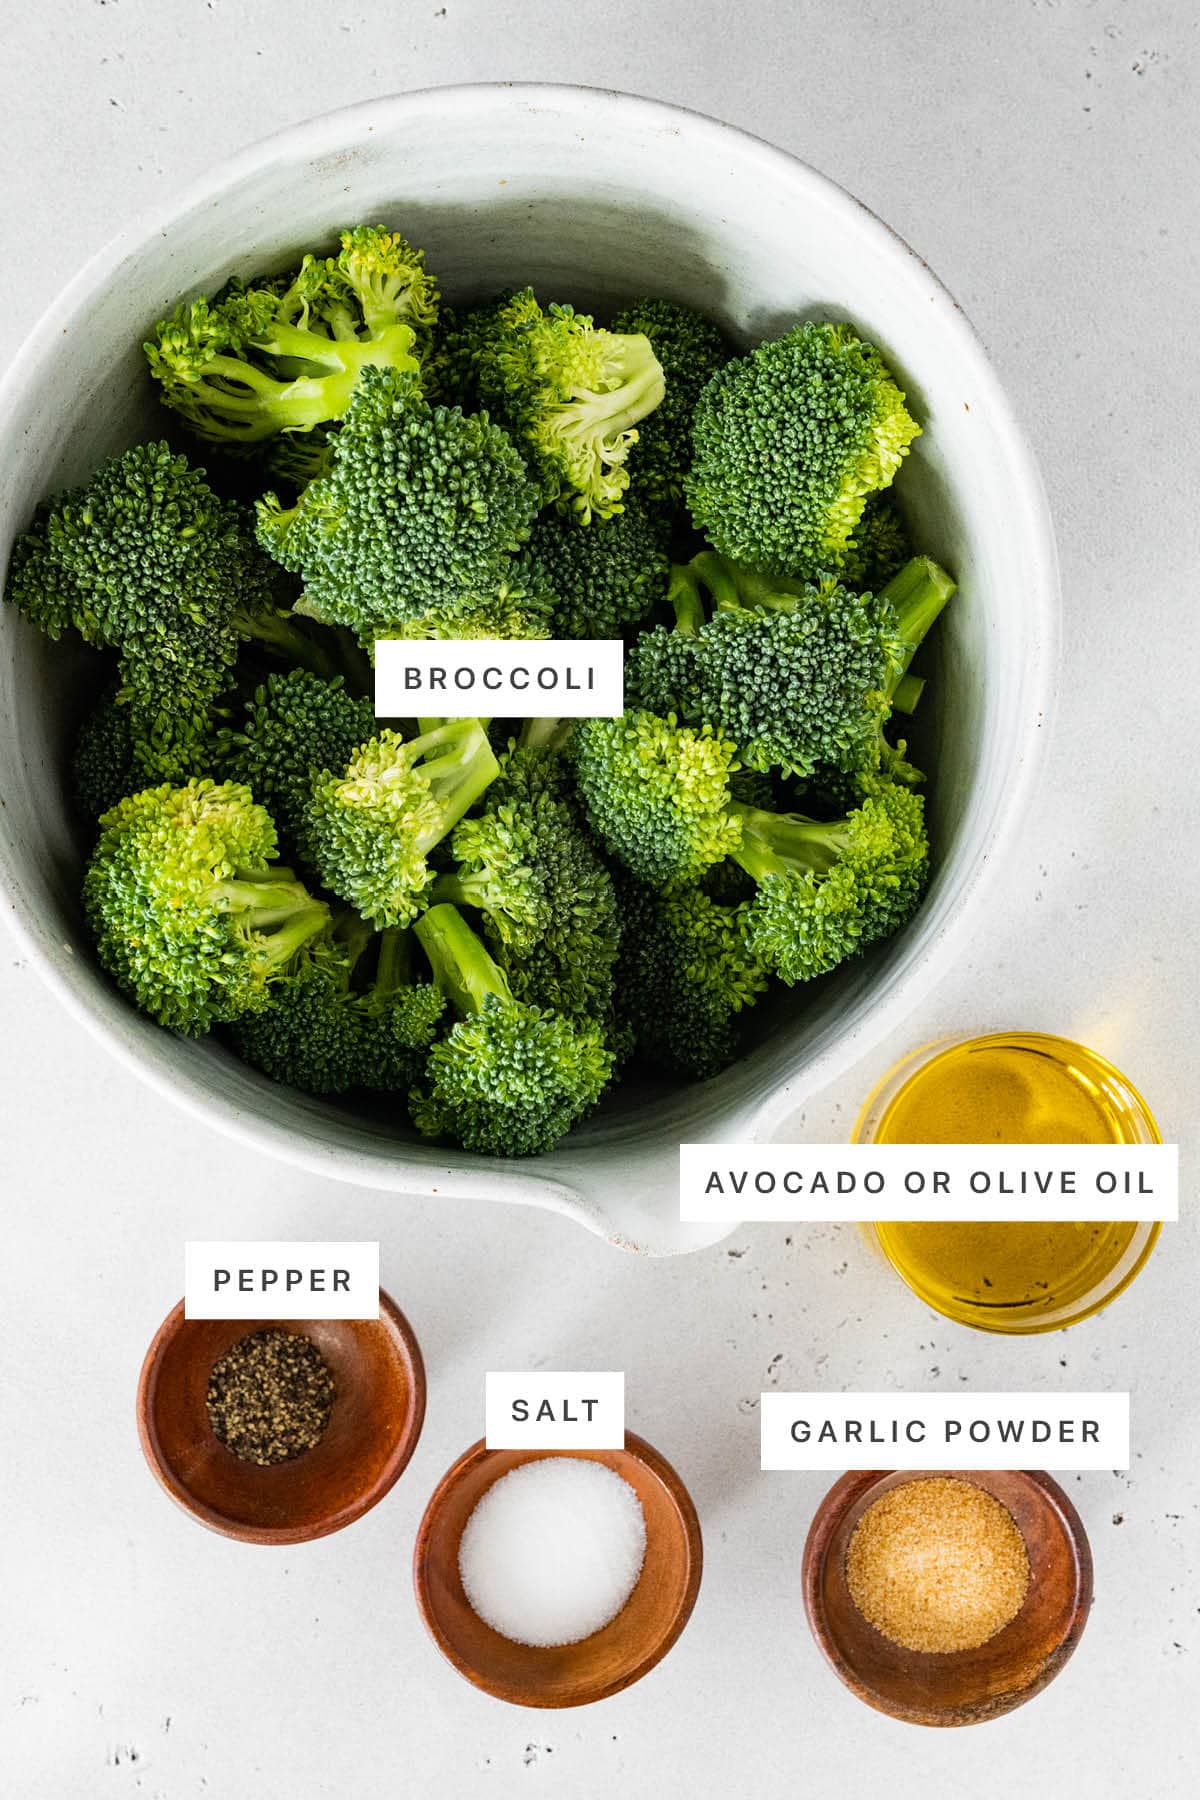 Ingredients measured out to make air fryer broccoli: garlic powder, salt, pepper, olive or avocado oil and broccoli.